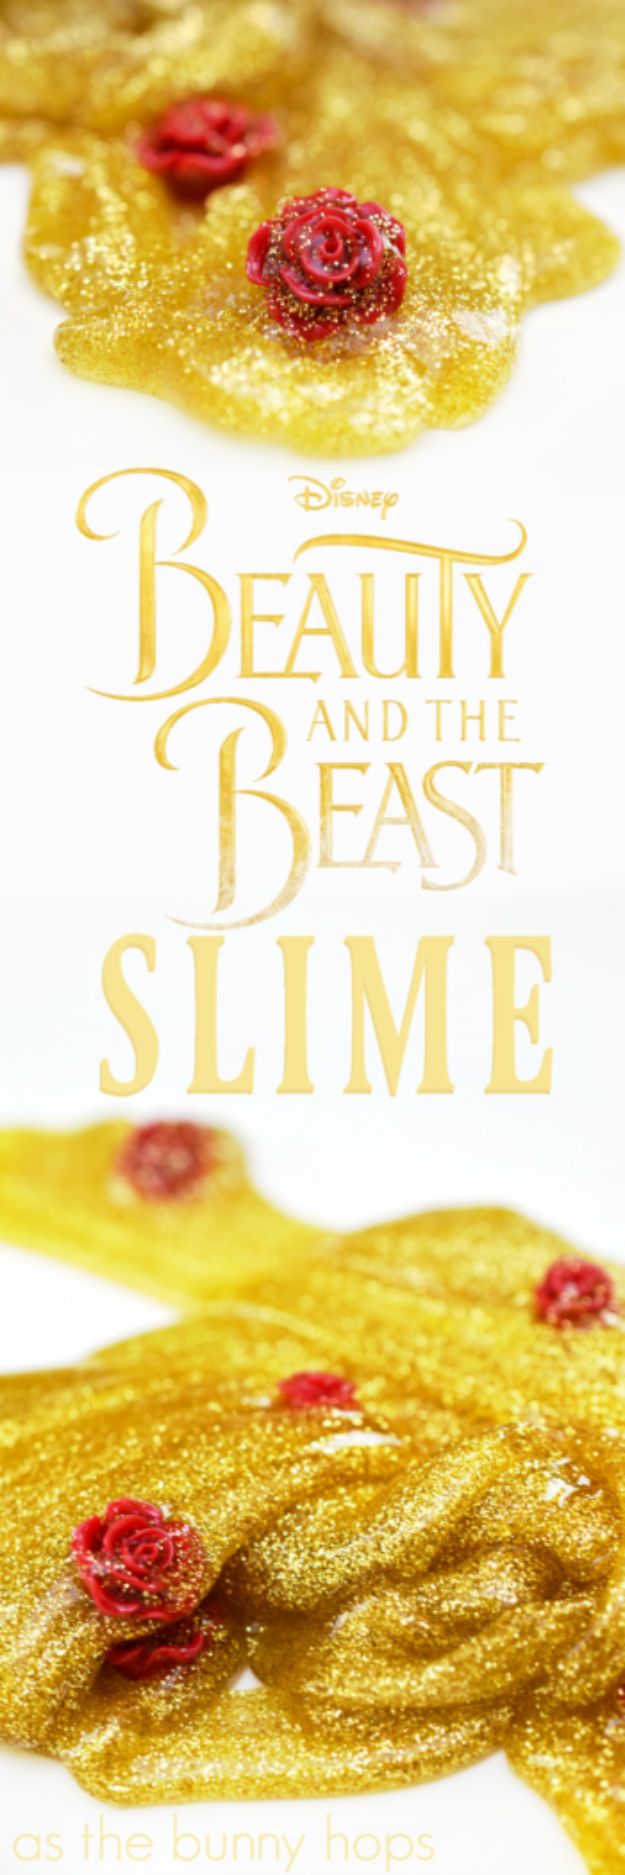 Best DIY Slime Recipes - Beauty And The Beast Slime- Cool and Easy Slime Recipe and Tutorials - Ideas Without Glue, Without Borax, For Kids, With Liquid Starch, Cornstarch and Laundry Detergent - How to Make Slime at Home - Fun Crafts and DIY Projects for Teens, Kids, Teenagers and Teens - Galaxy and Glitter Slime, Edible Slime, Rainbow Colored Slime, Shaving Cream recipes and more fun crafts and slimes #slimerecipes #slime #diyslime #teencrafts